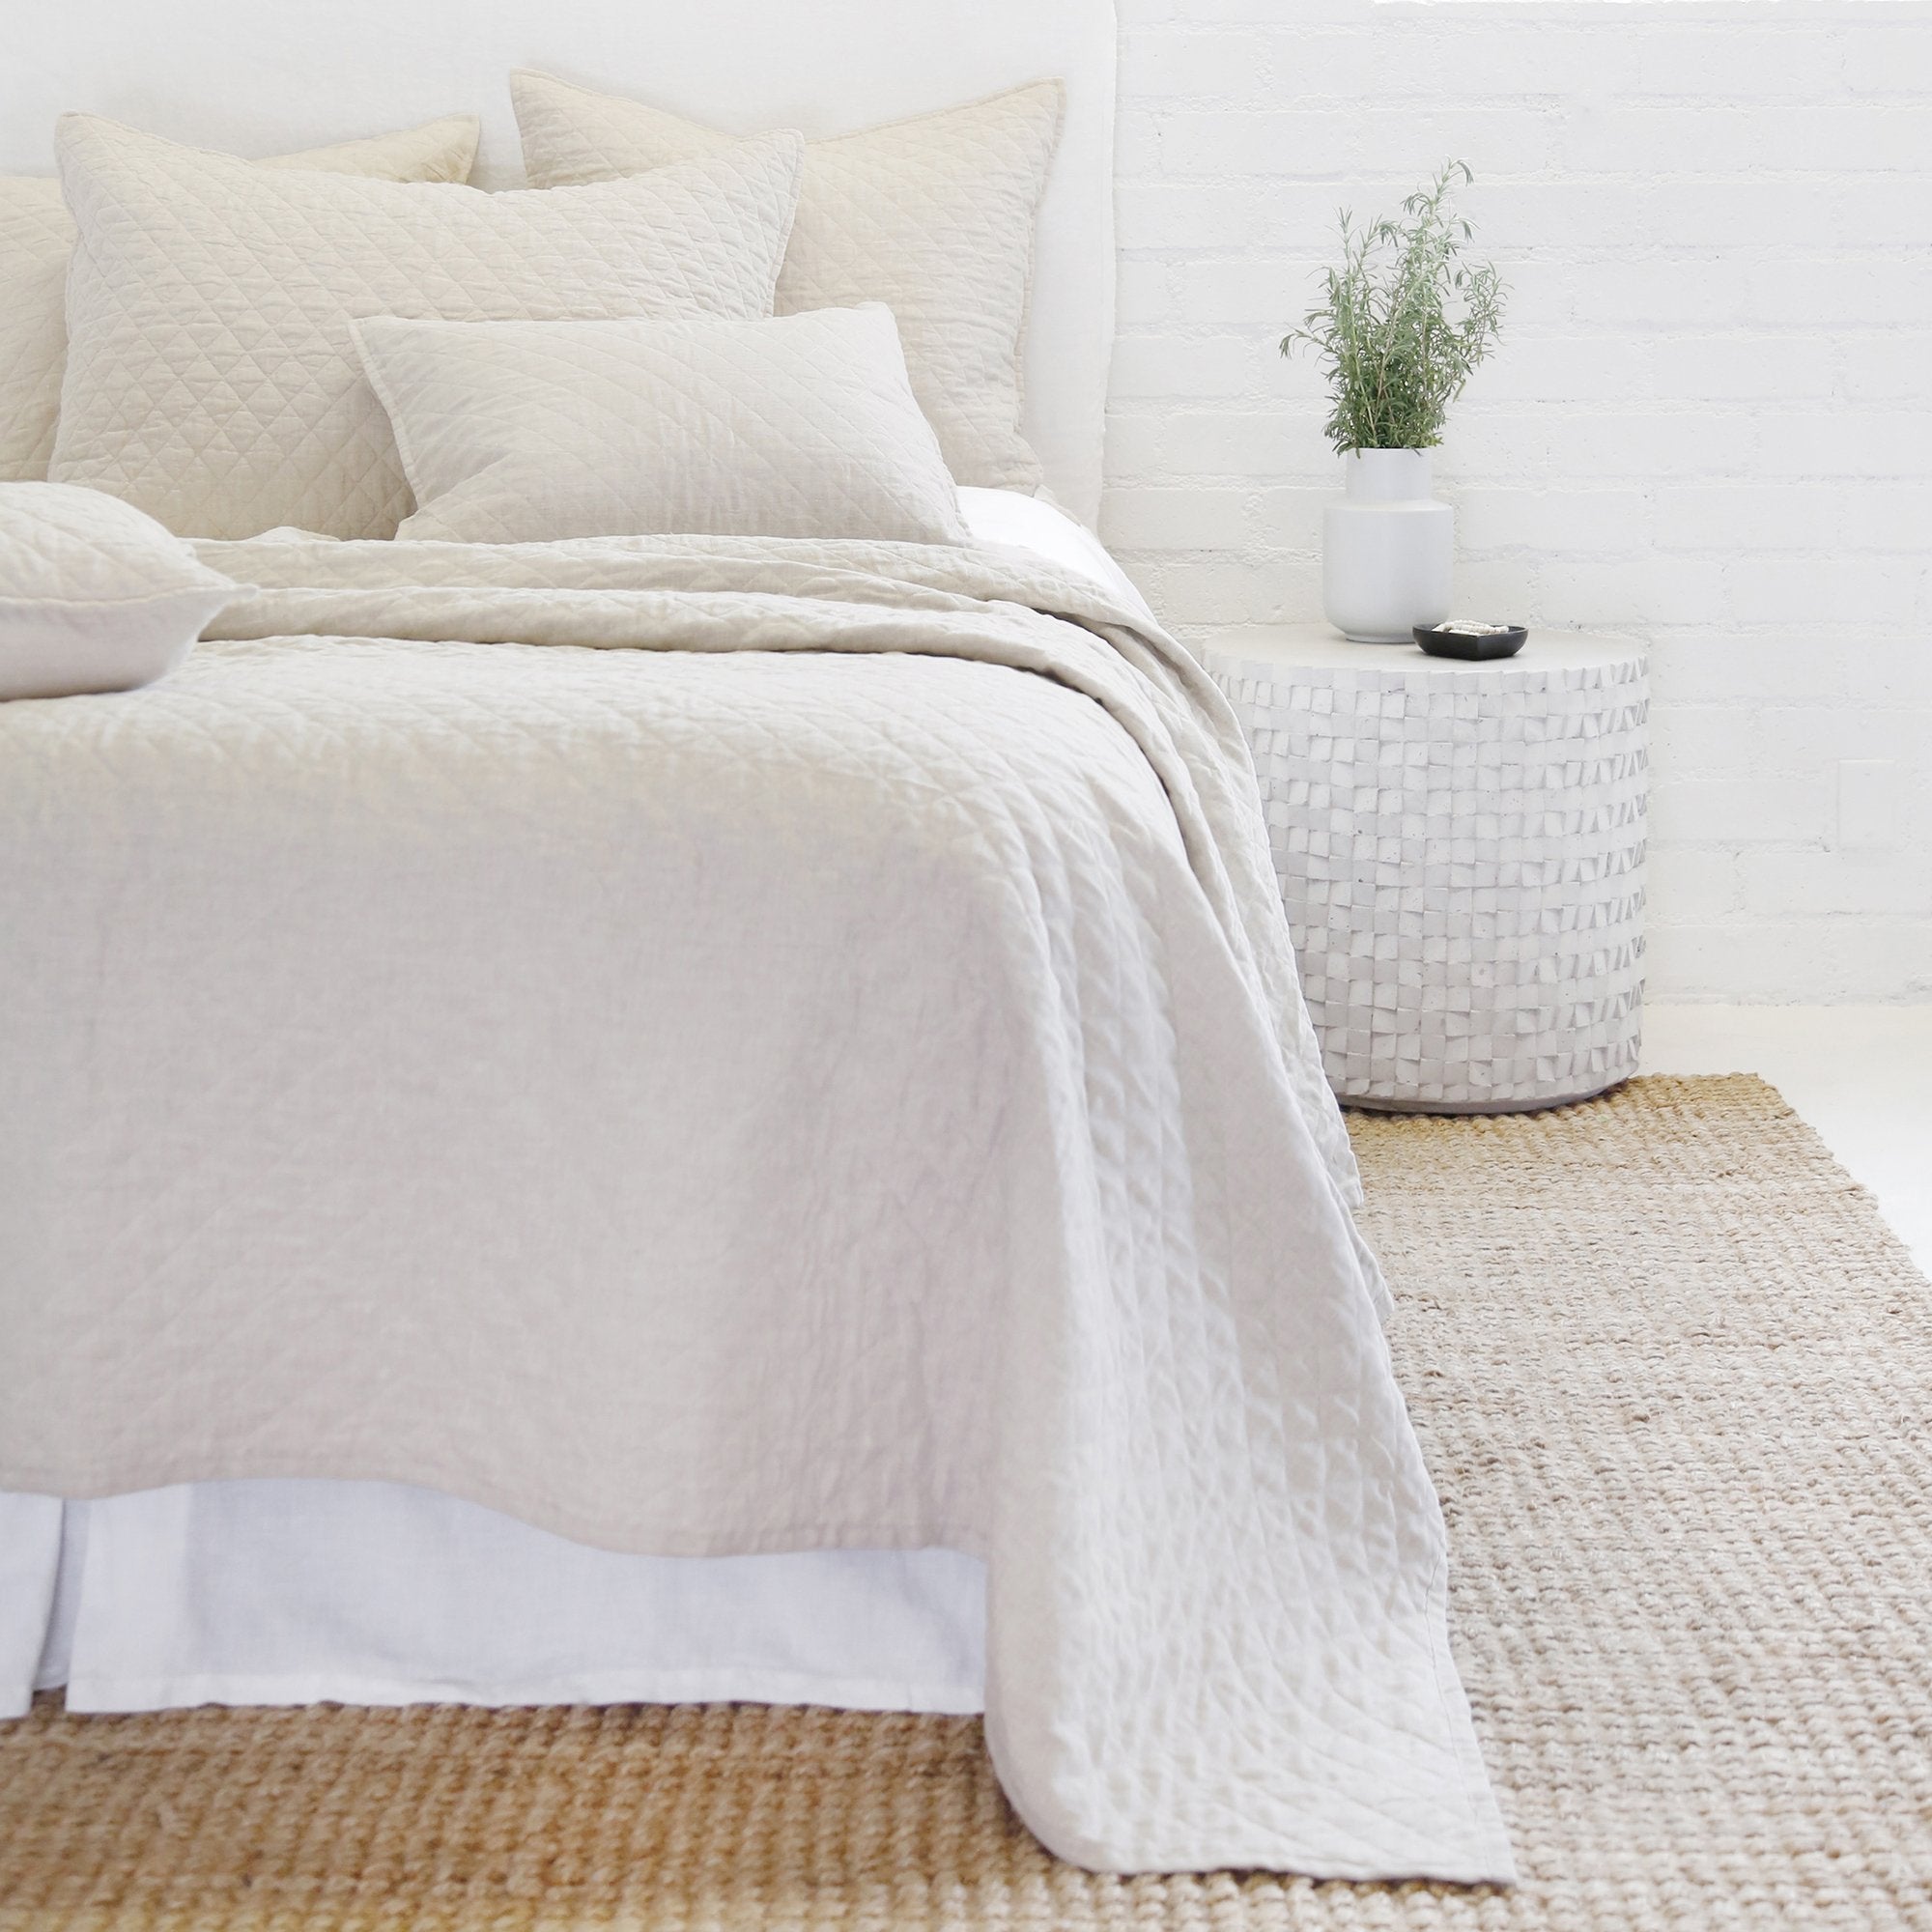 Pom Pom at Home Bedding - Hampton Big Pillow in Flax | Fig Linens